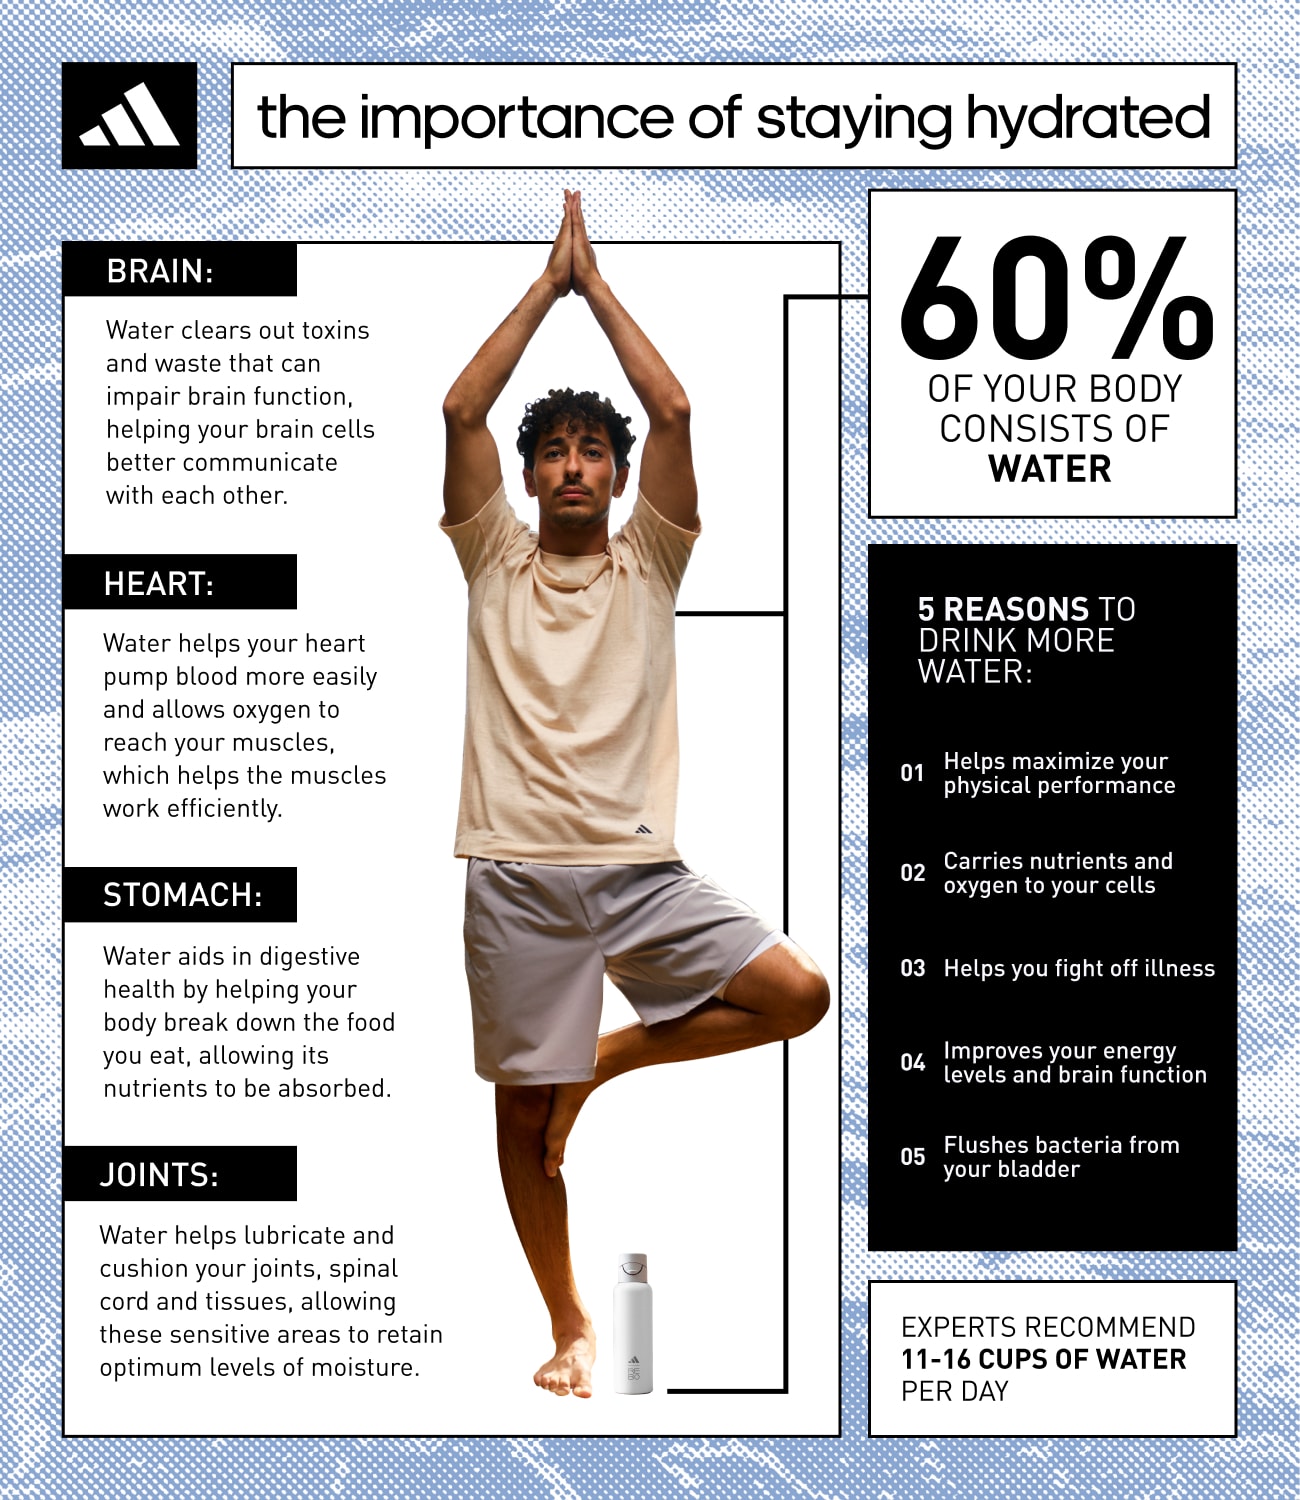 How-to-Stay-Hydrated-Blog-Image-01